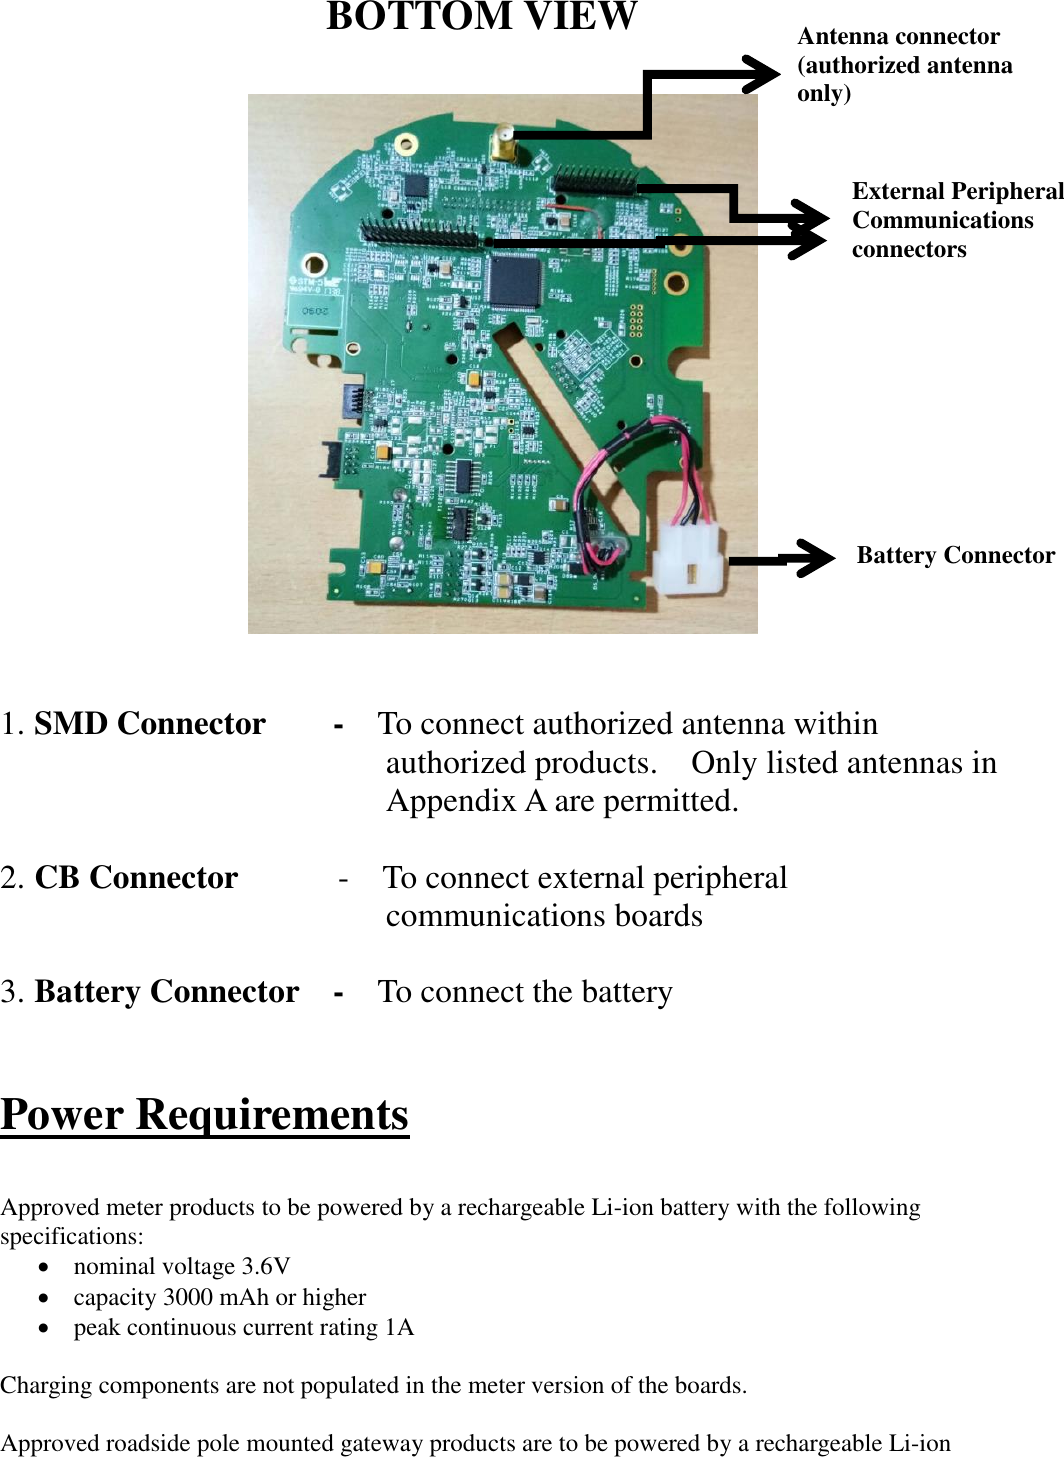                      1. SMD Connector        -  To connect authorized antenna within     authorized products.    Only listed antennas in     Appendix A are permitted.  2. CB Connector            -  To connect external peripheral    communications boards  3. Battery Connector    -  To connect the battery         Power Requirements  Approved meter products to be powered by a rechargeable Li-ion battery with the following specifications: • nominal voltage 3.6V   • capacity 3000 mAh or higher • peak continuous current rating 1A  Charging components are not populated in the meter version of the boards.  Approved roadside pole mounted gateway products are to be powered by a rechargeable Li-ion BOTTOM VIEW Battery Connector External Peripheral Communications connectors Antenna connector (authorized antenna only) 